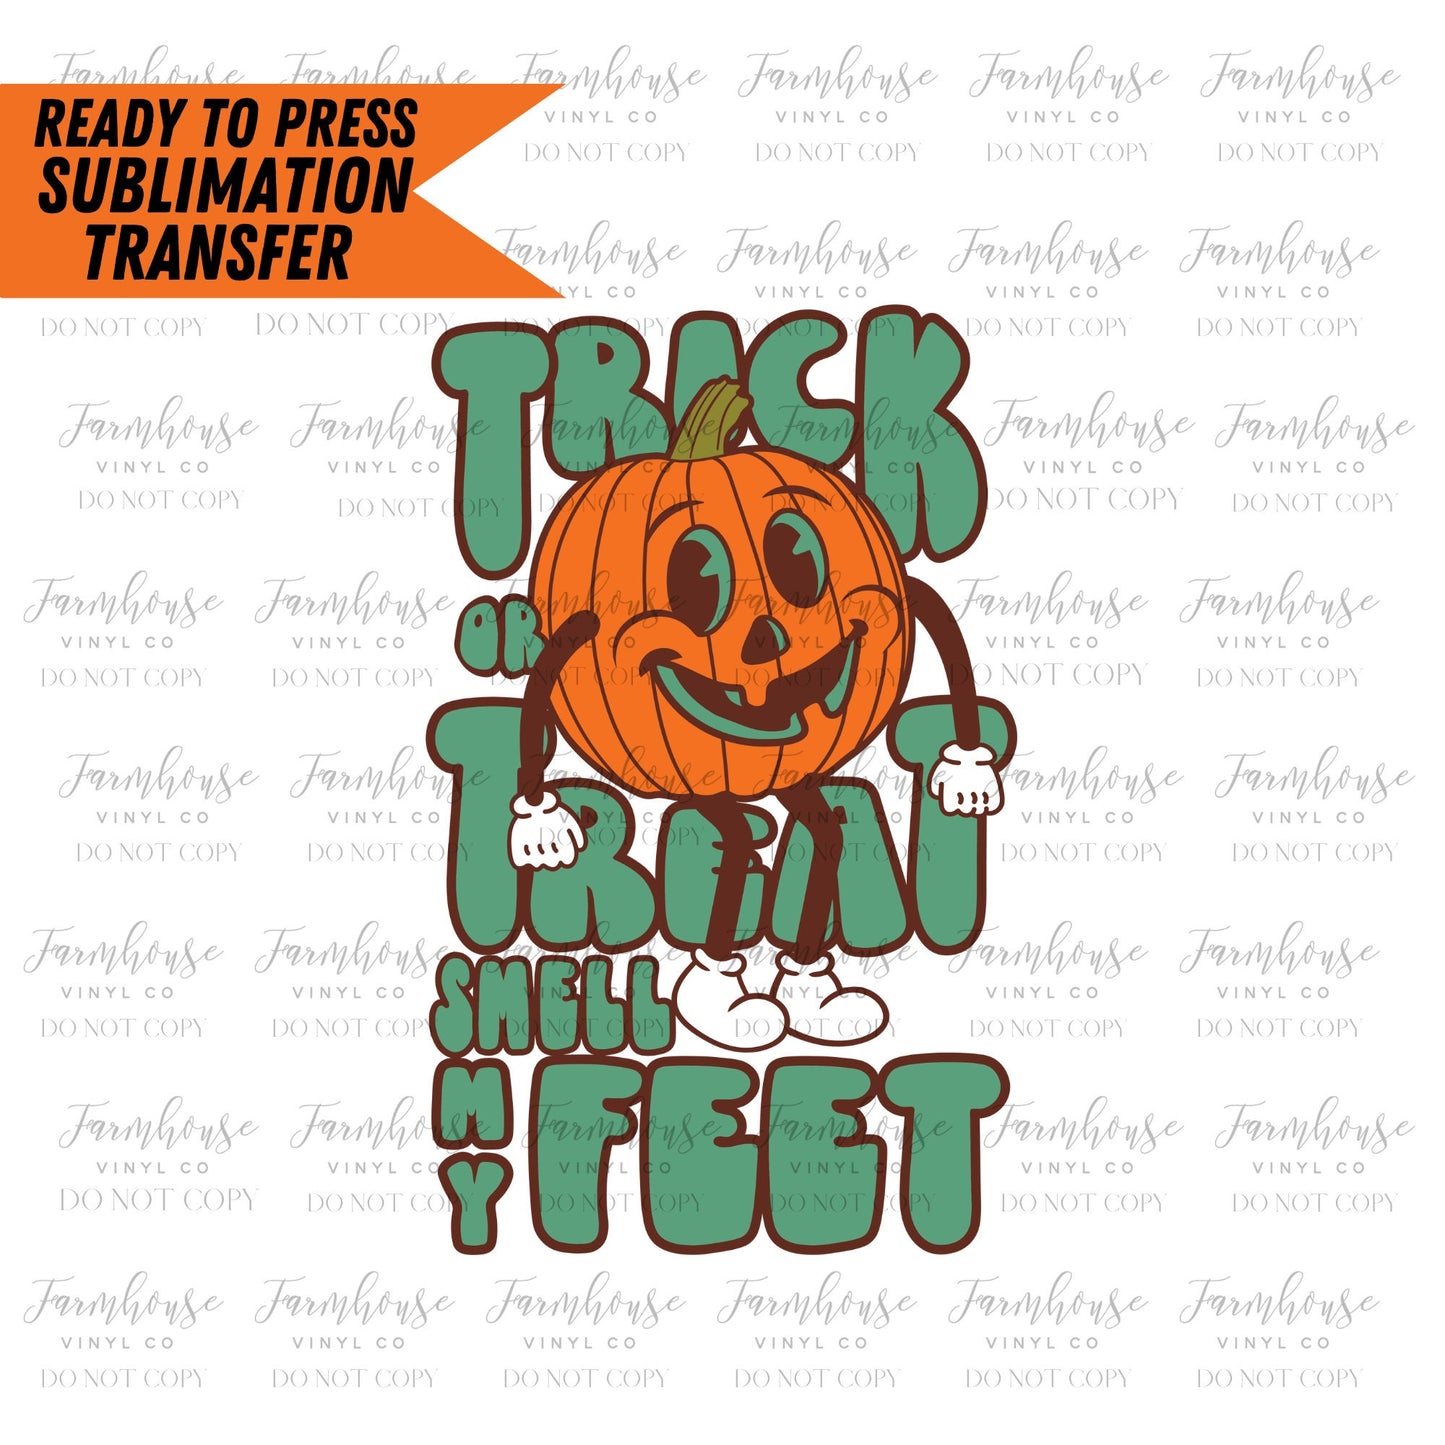 Trick or Treat Smell My Feet Retro Design, Ready to Press Sublimation Transfer, Trending Graphic 22, Sublimation Prints, Pumpkin Design